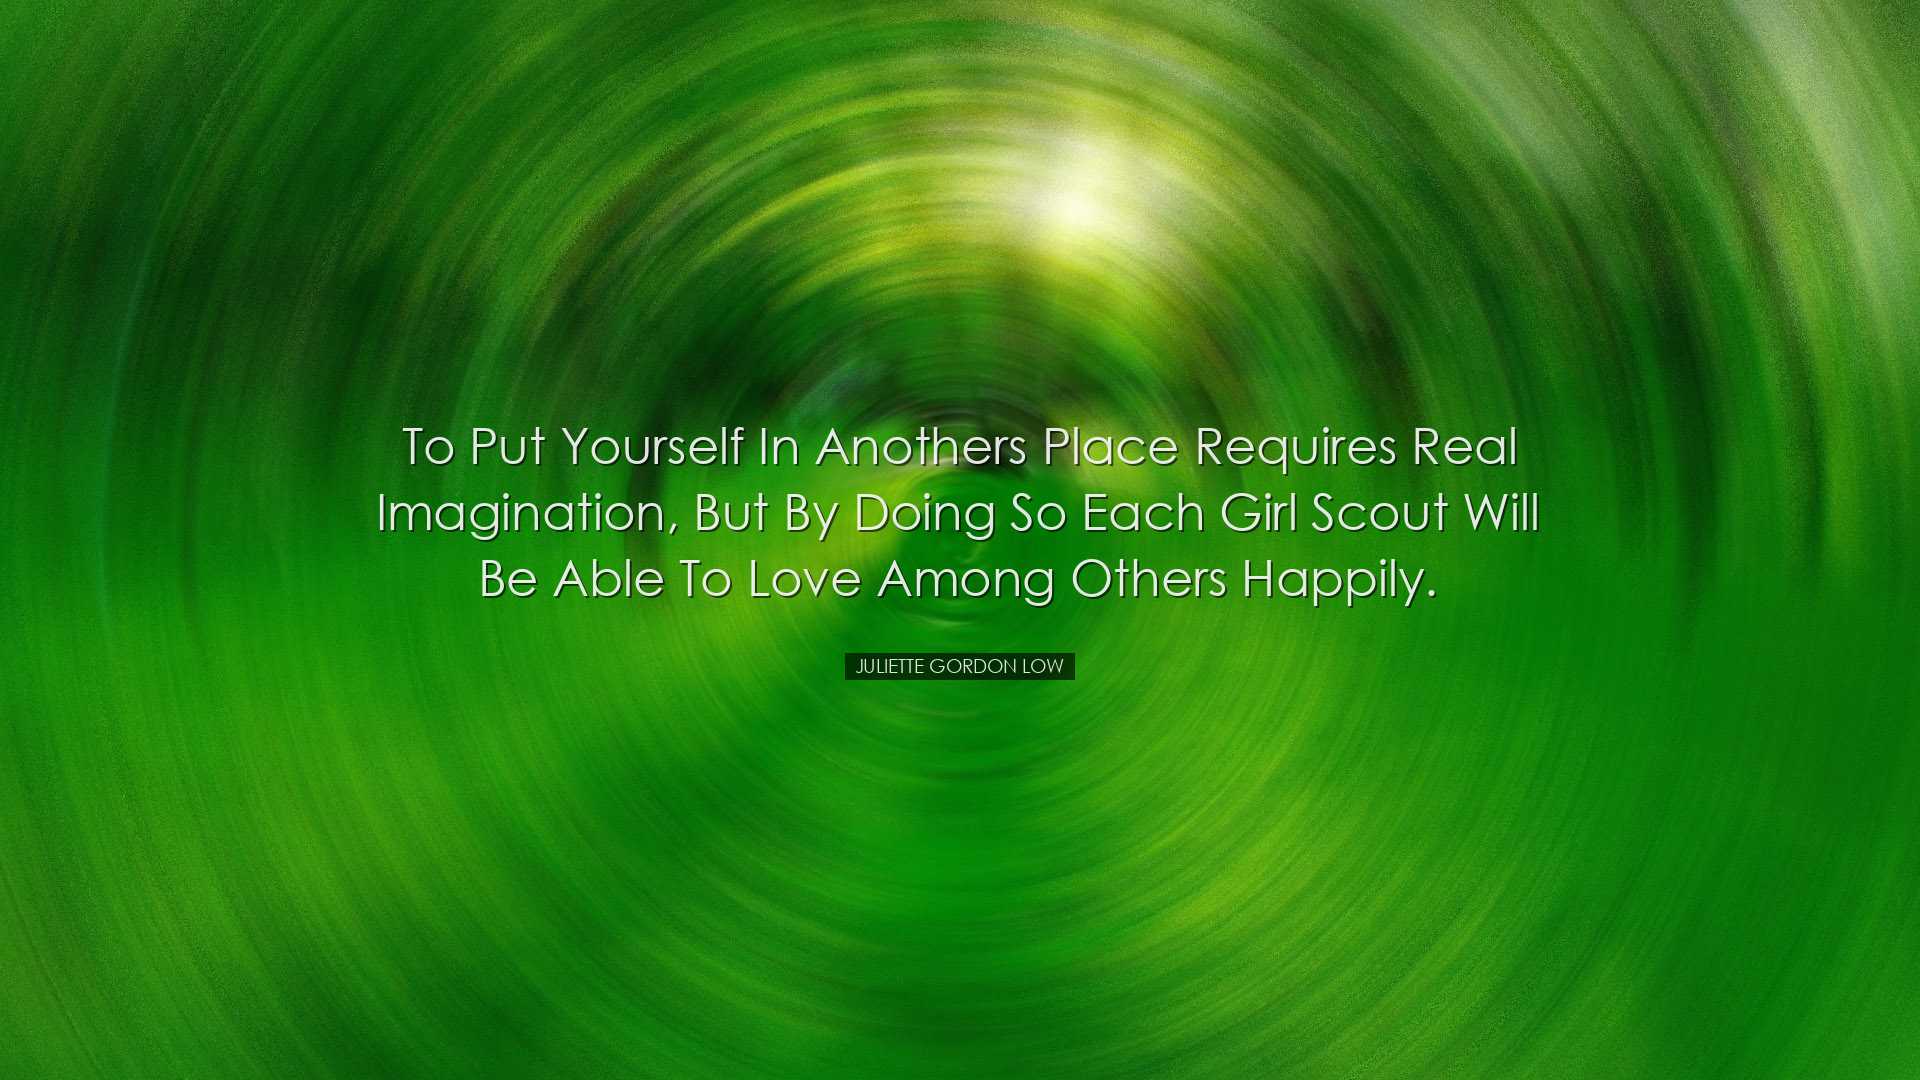 To put yourself in anothers place requires real imagination, but b